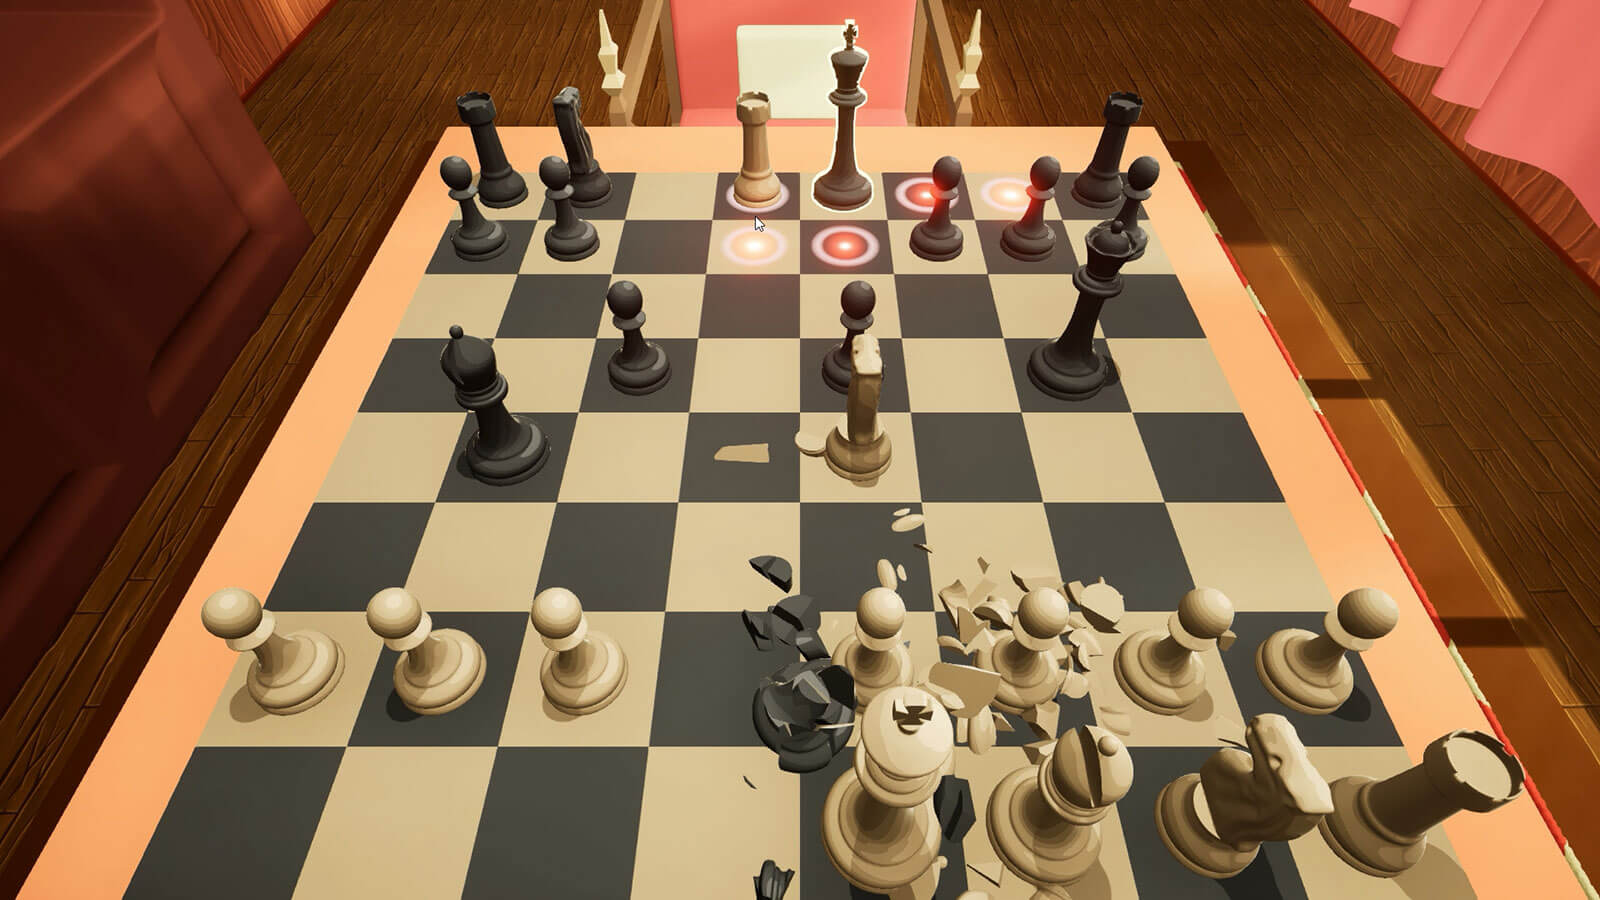 Overhead view of 3D chess pieces doing battle and shattering apart